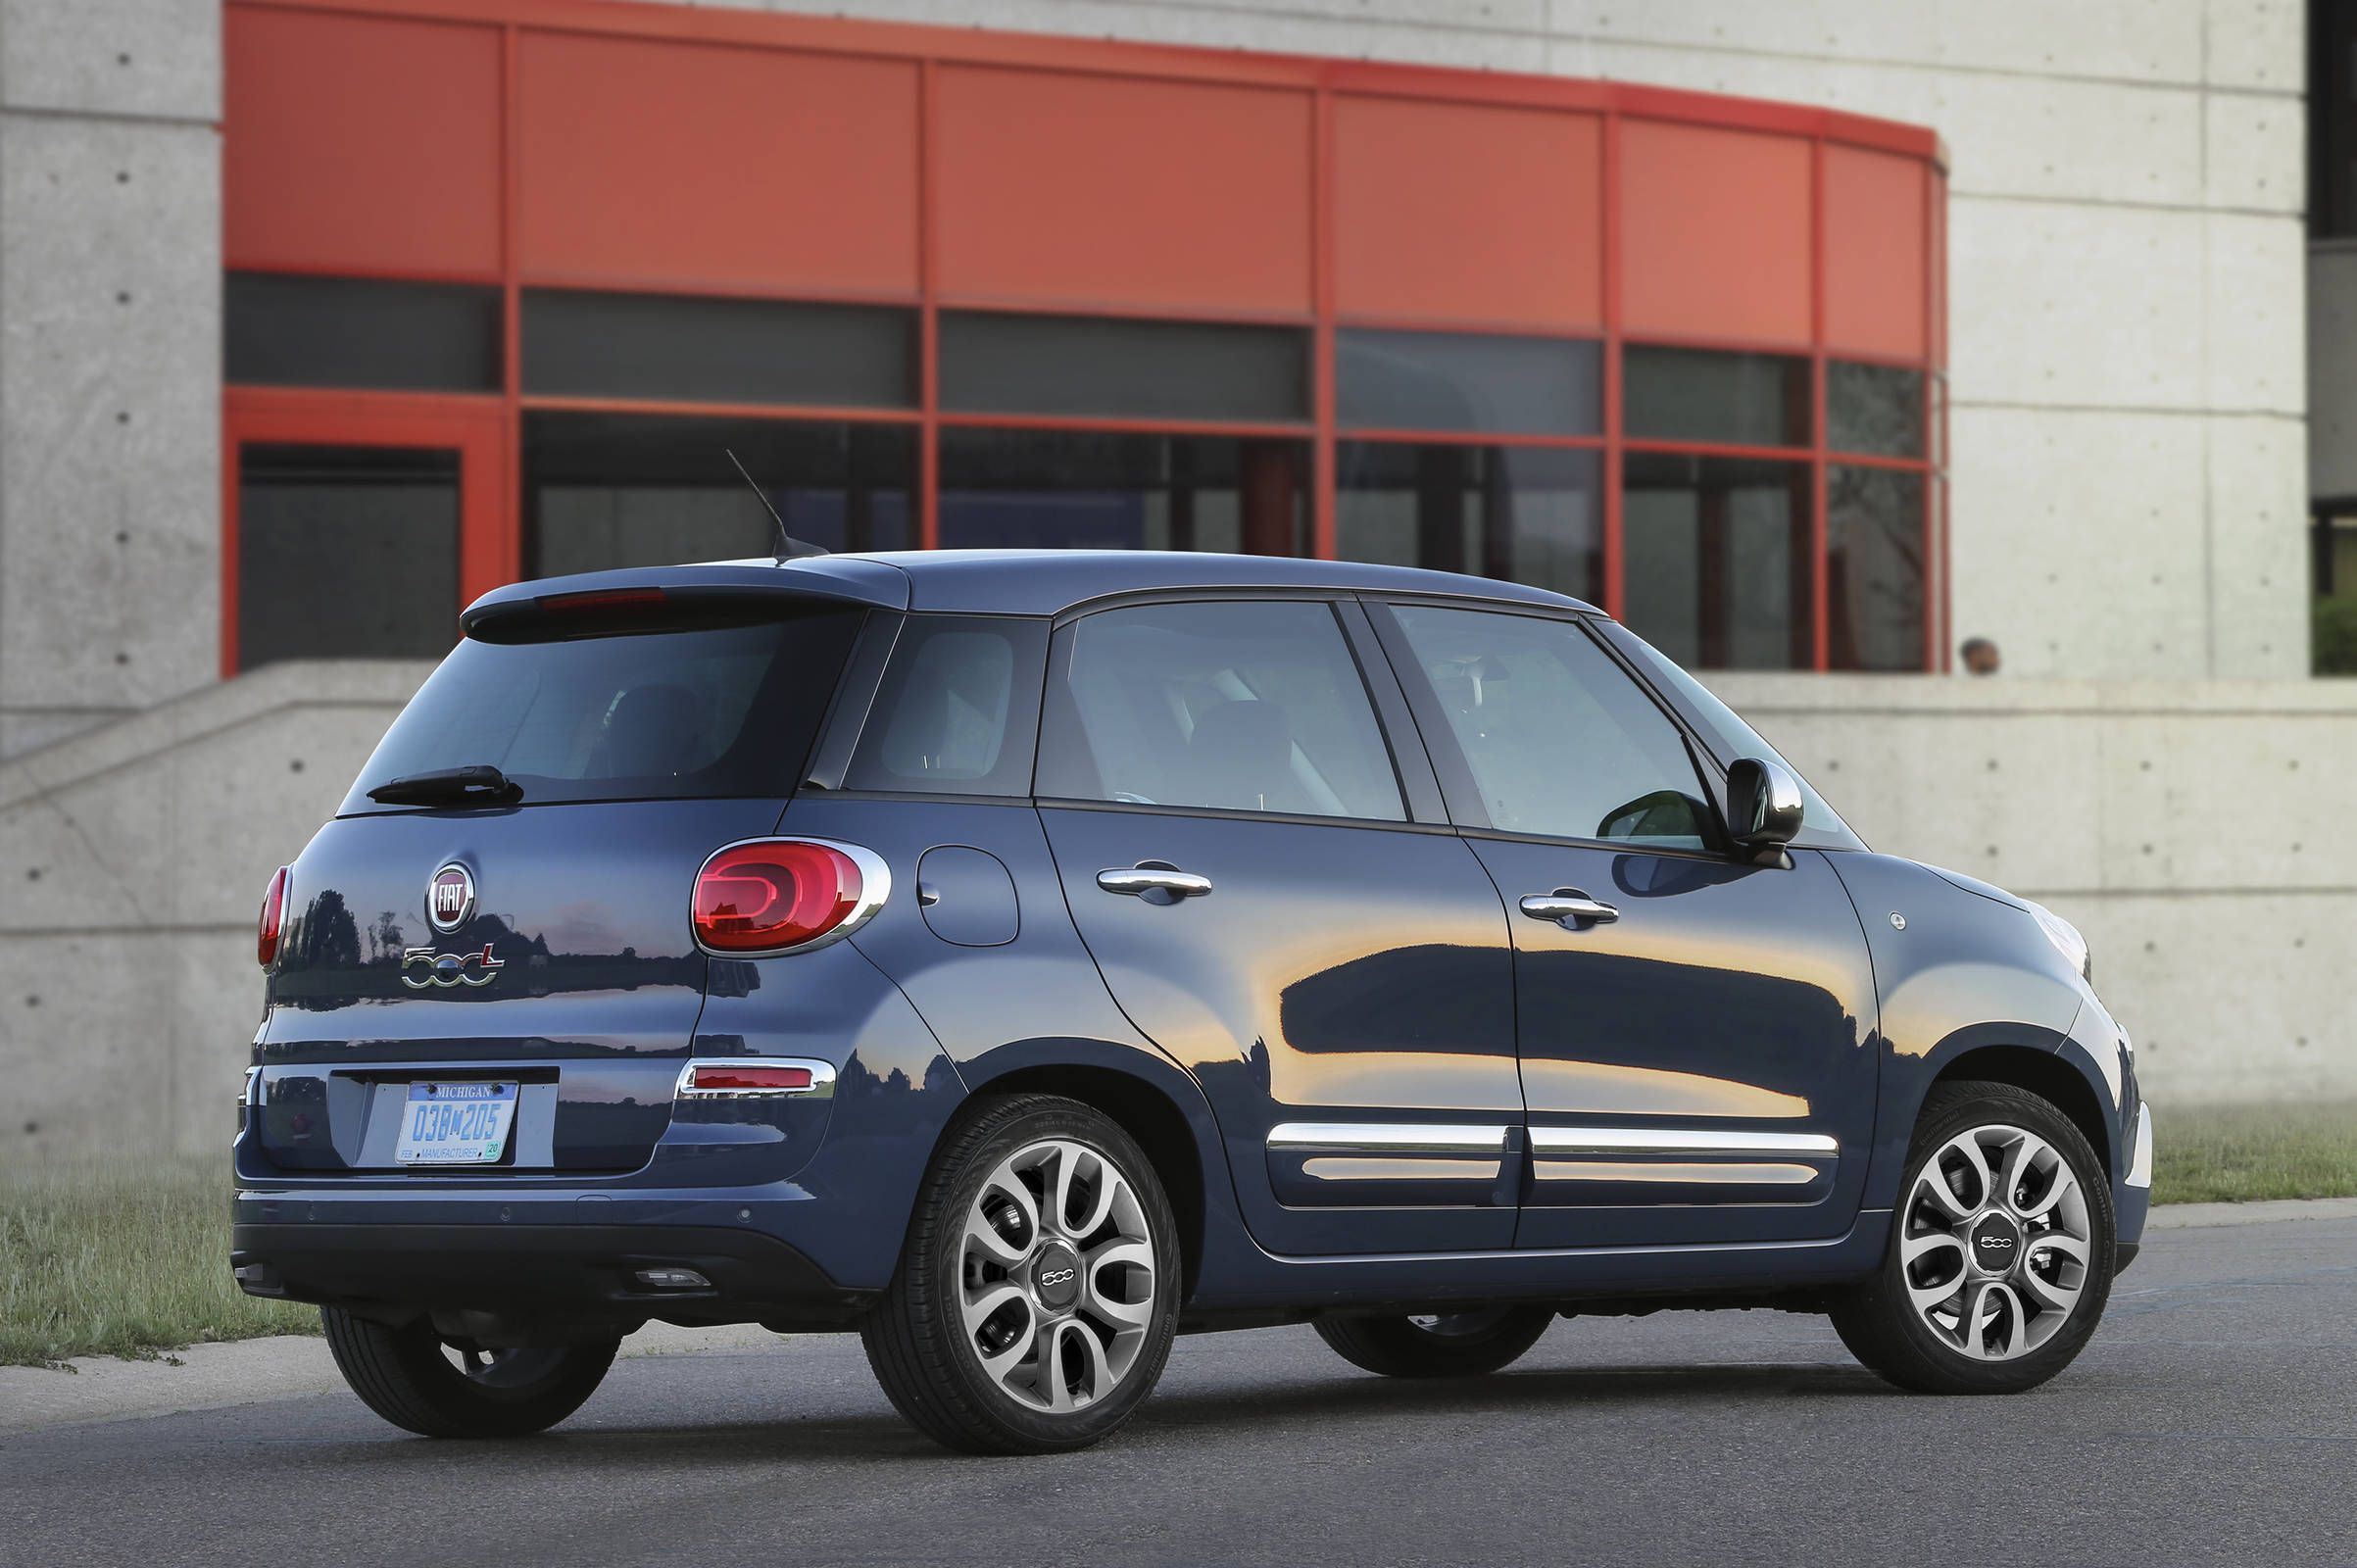 2018 Fiat 500L essentials: The most curious car currently sold in America